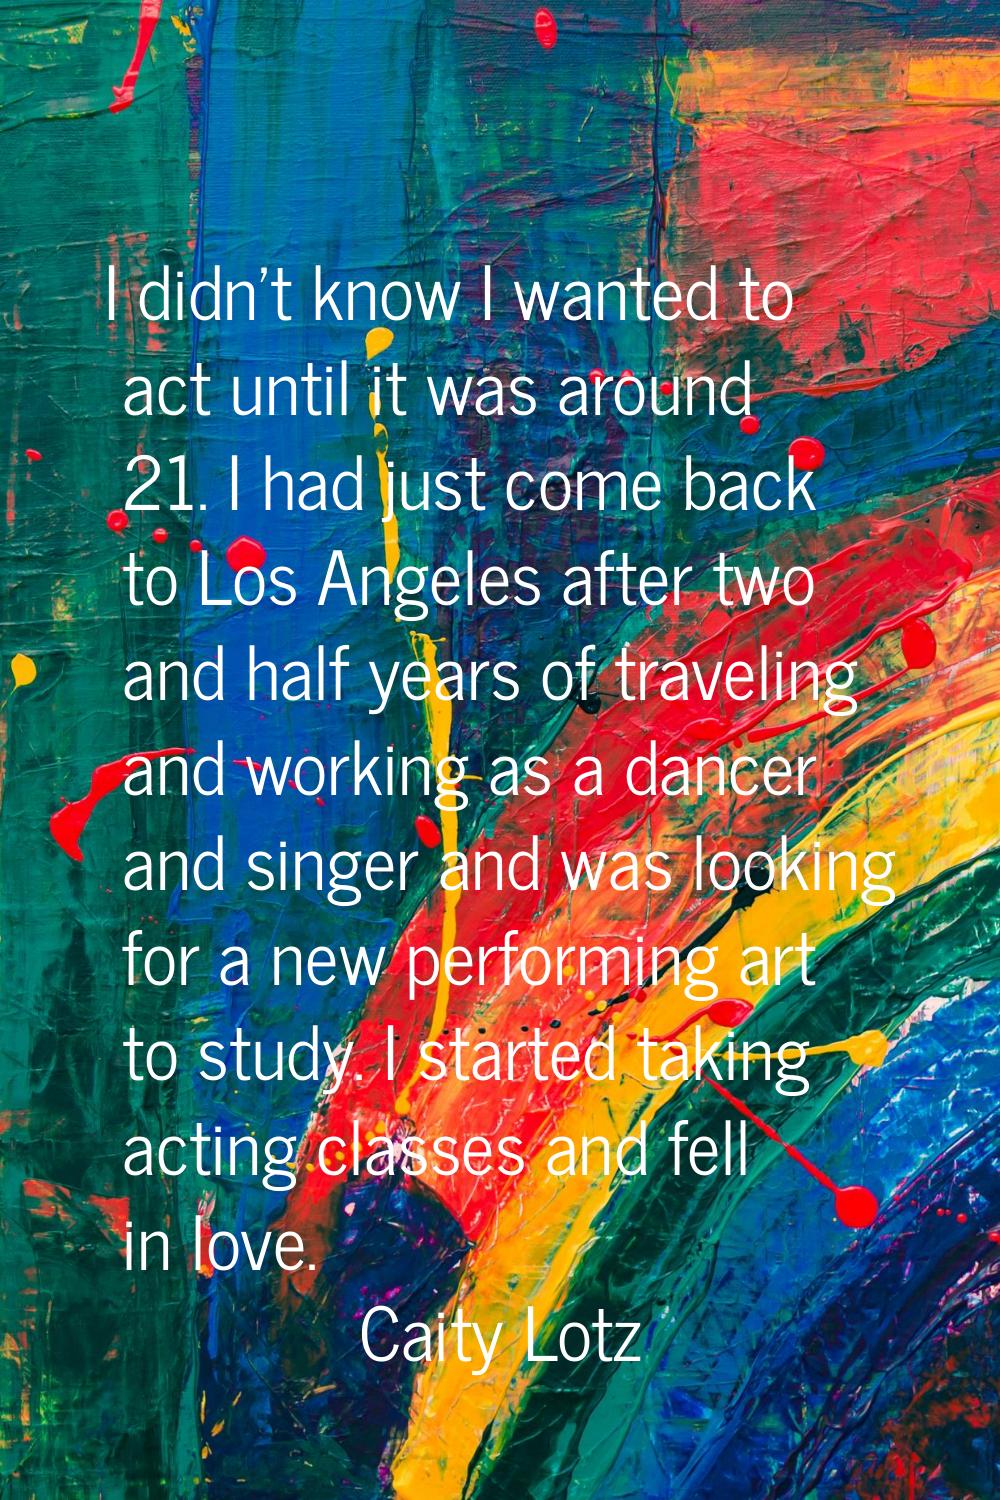 I didn't know I wanted to act until it was around 21. I had just come back to Los Angeles after two